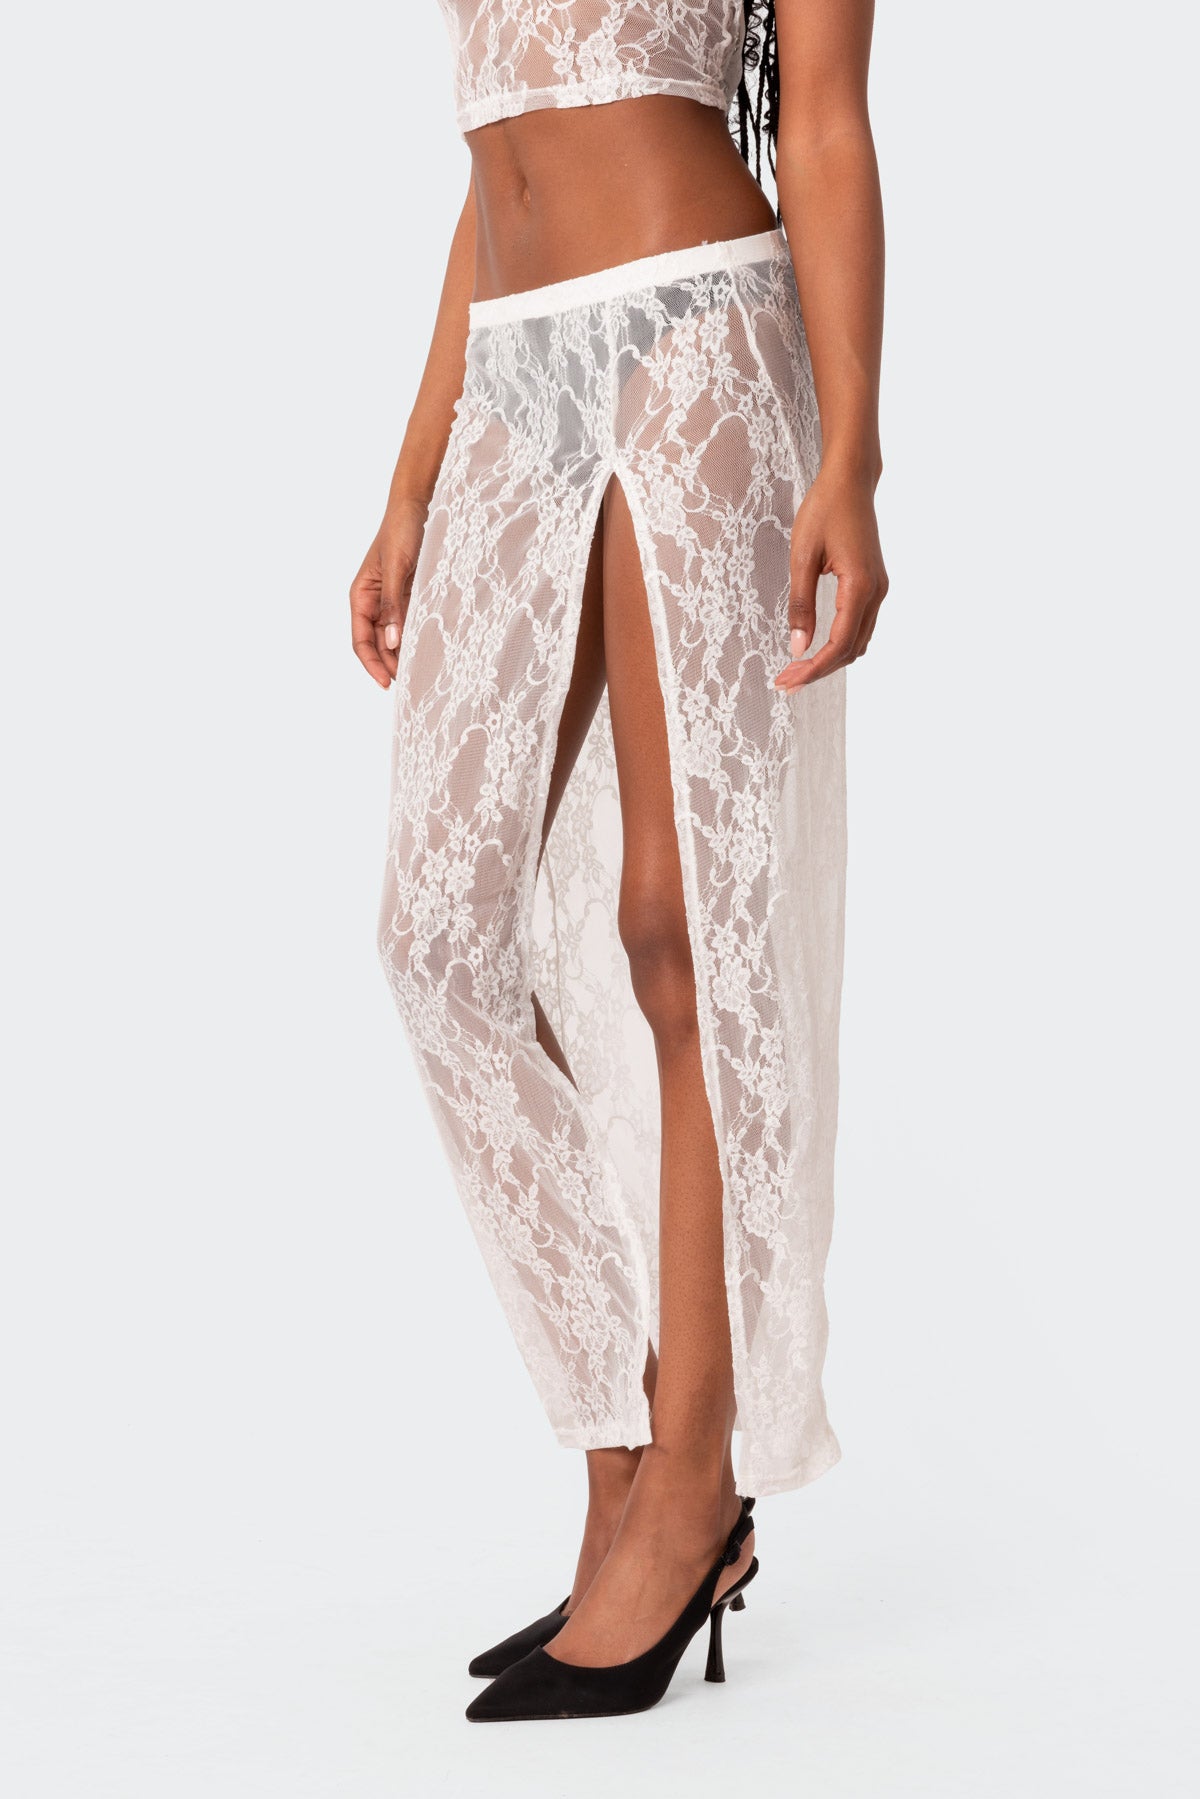 Aura Low Rise Sheer Lace Maxi Skirt